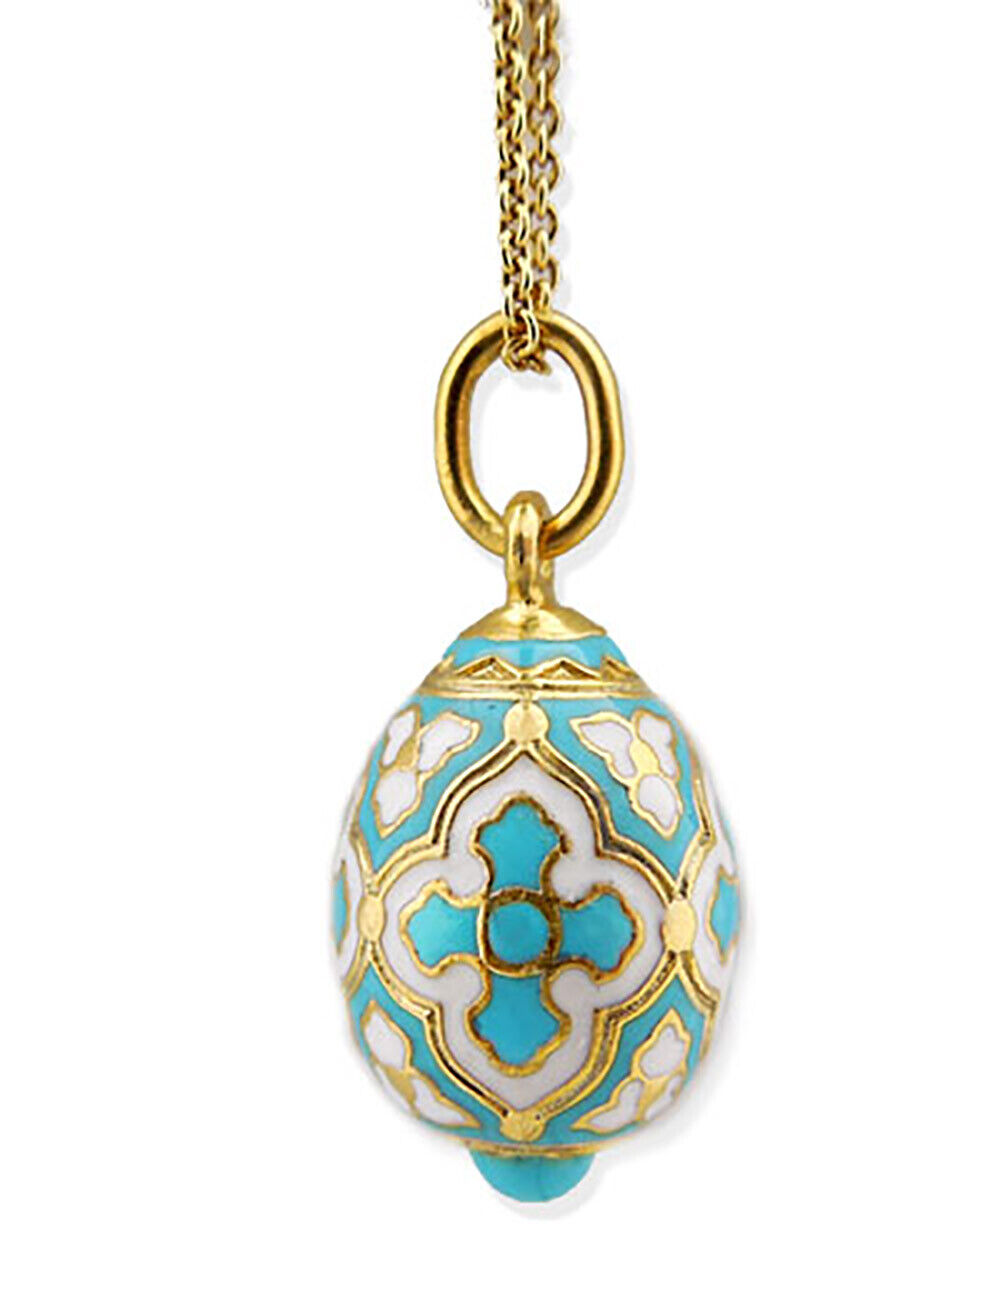 Egg Pendant With Cross Miniature Egg Sterling Silver 925 Gold Tone Turquoise